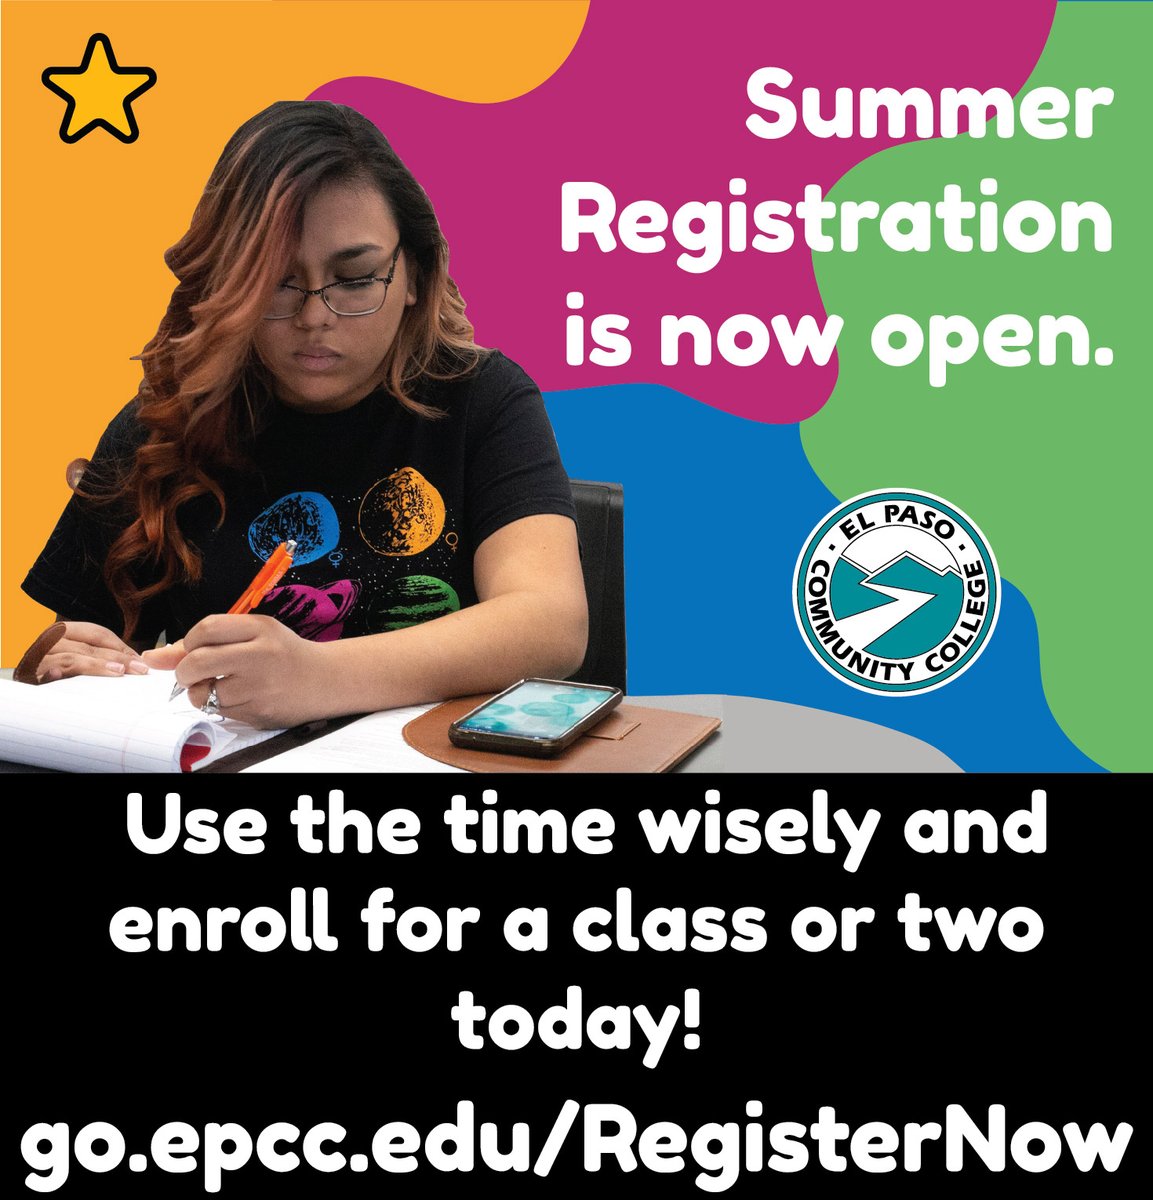 Register for summer classes and get ahead today! Visit go.epcc.edu/RegisterNow.